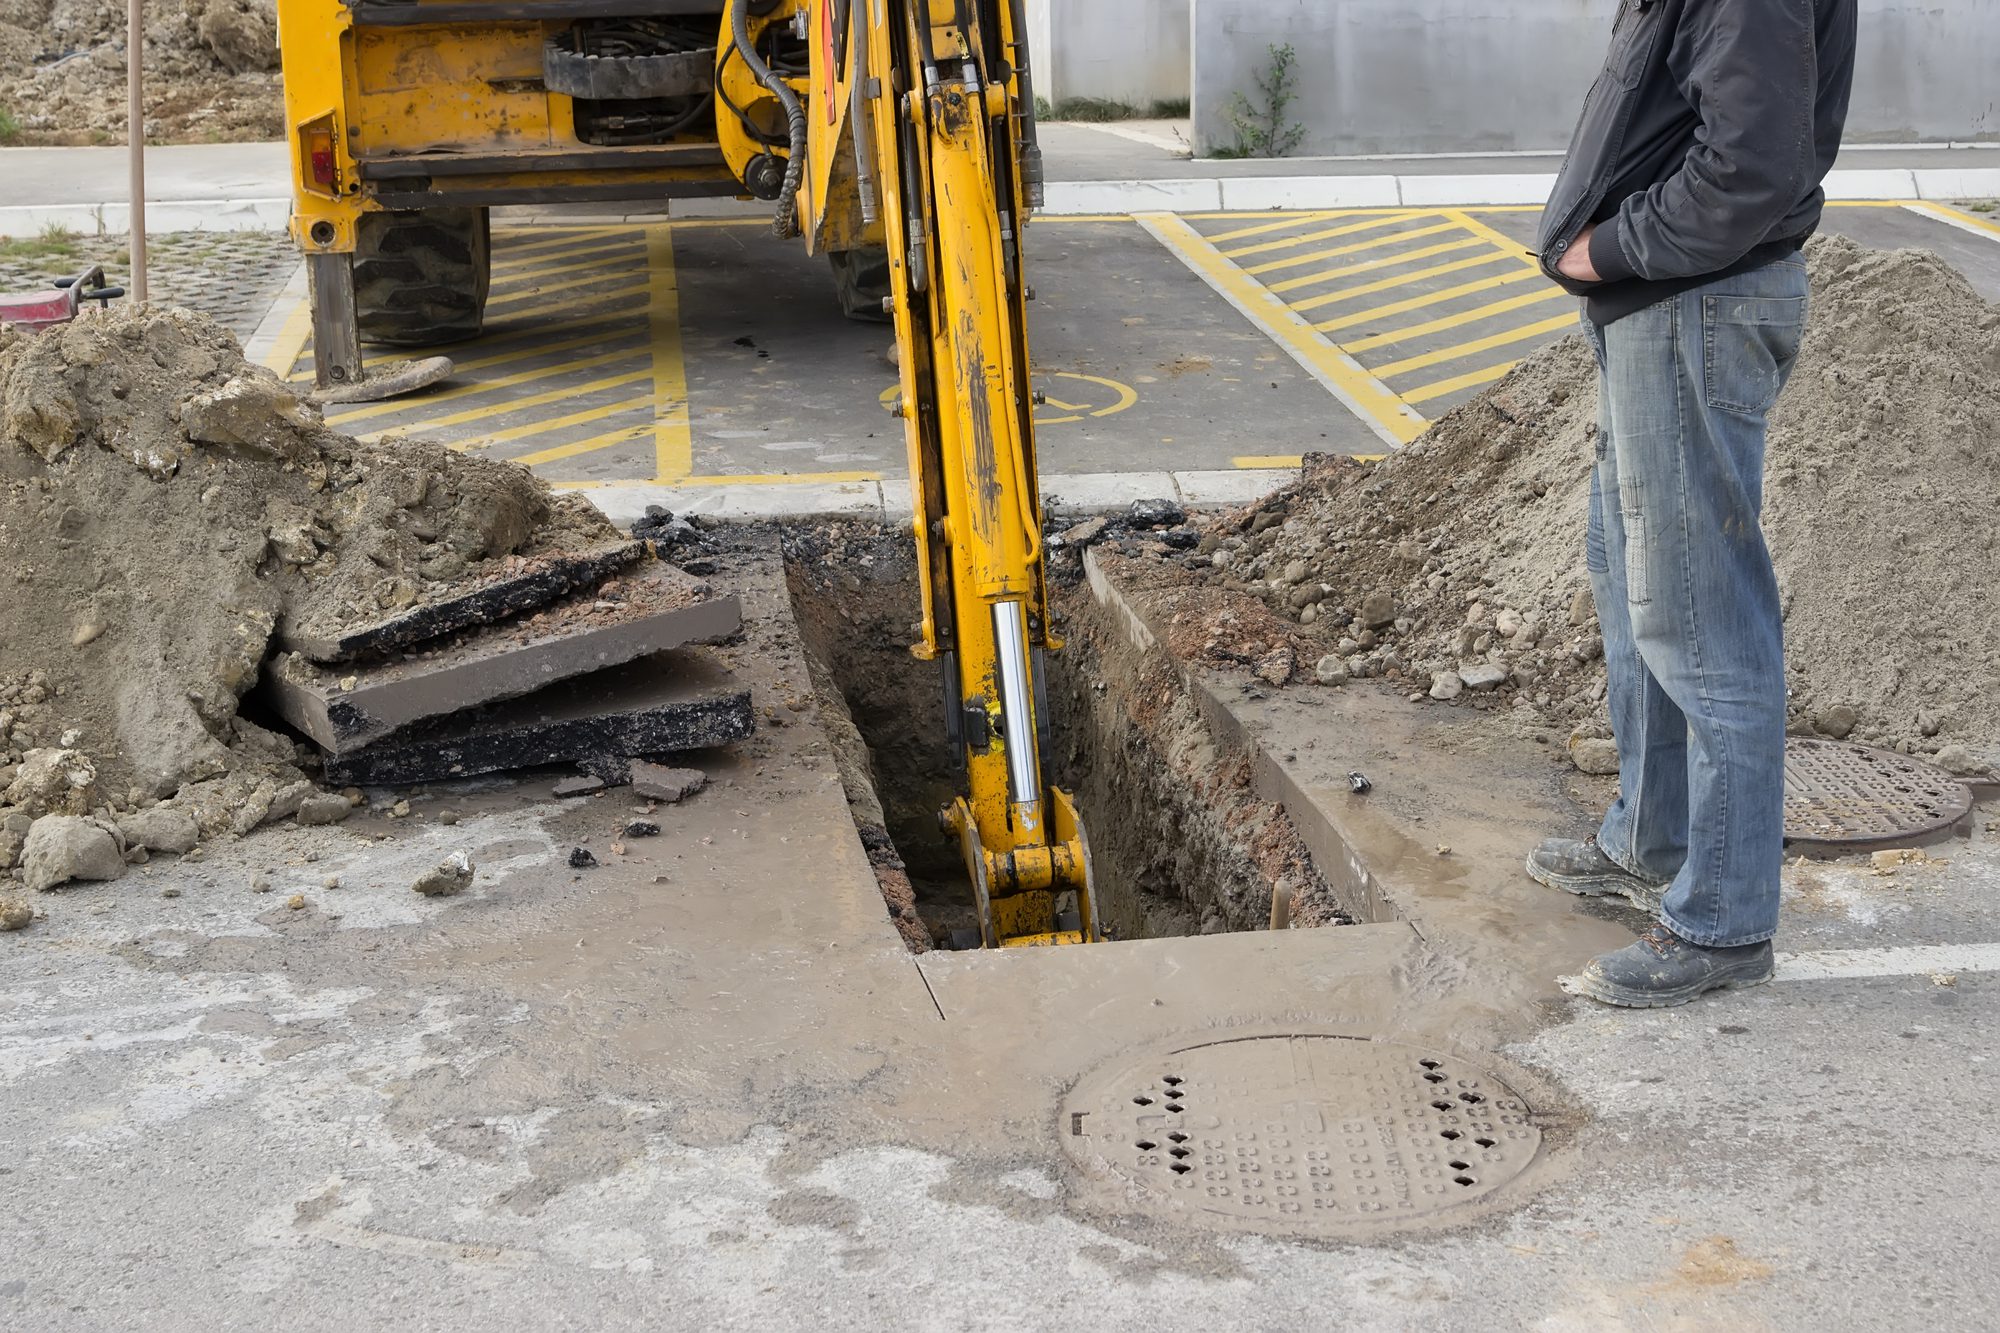 Excavating collapsed sewer line, sewer line replacement. Sewer line partial replacement.